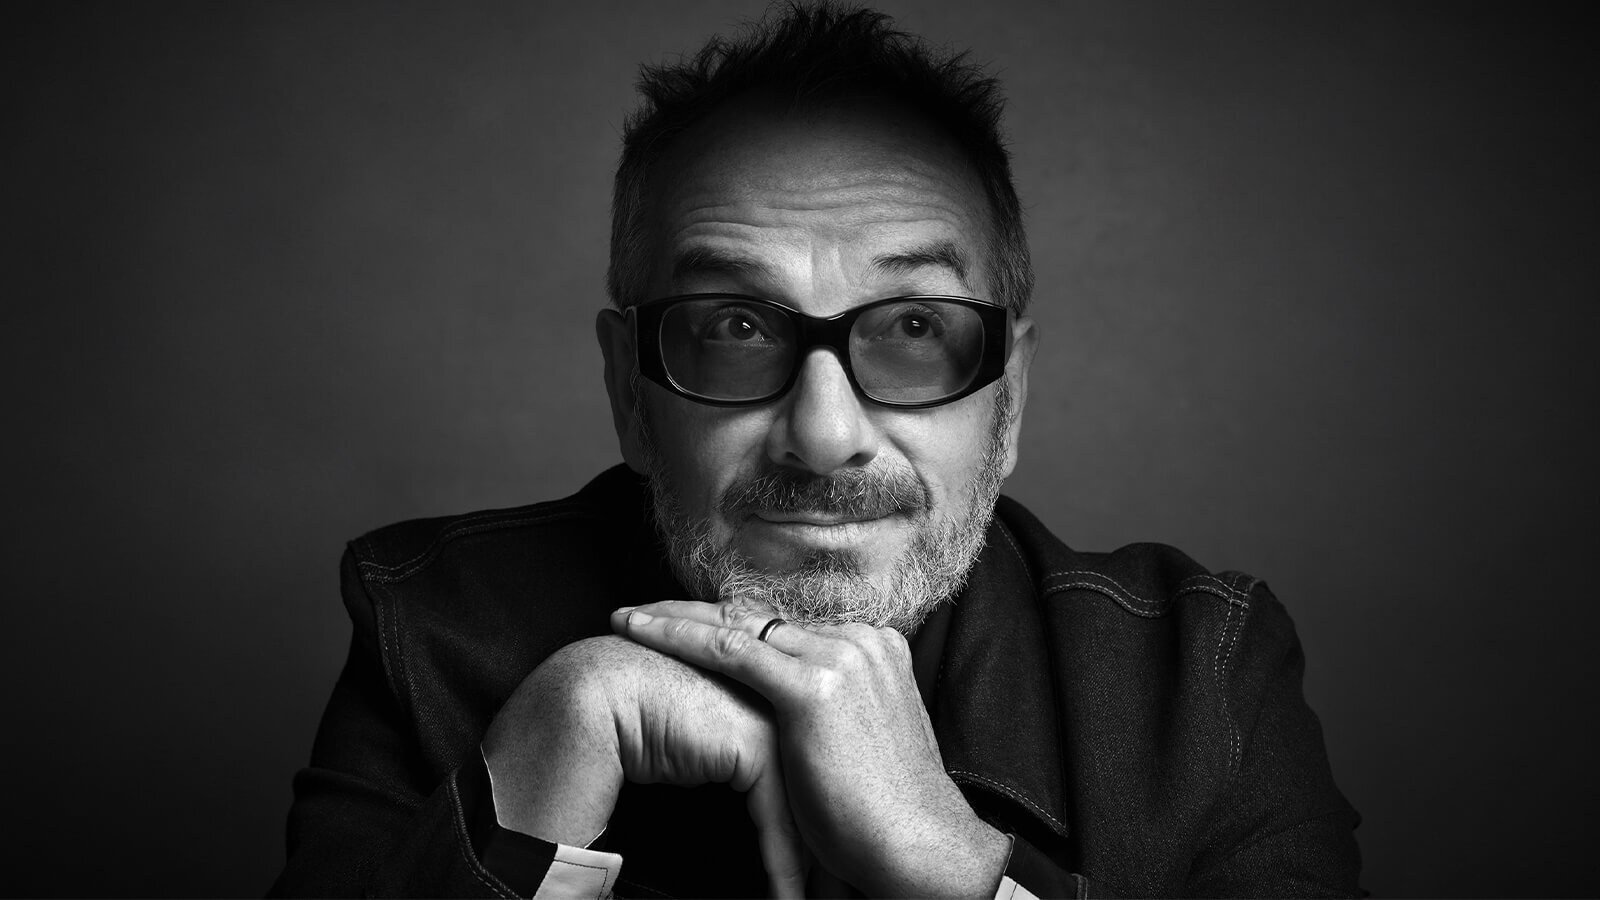 A black and white portrait of singer, songwriter, and producer Elvis Costello wearing dark-tinted glasses and a wedding band.